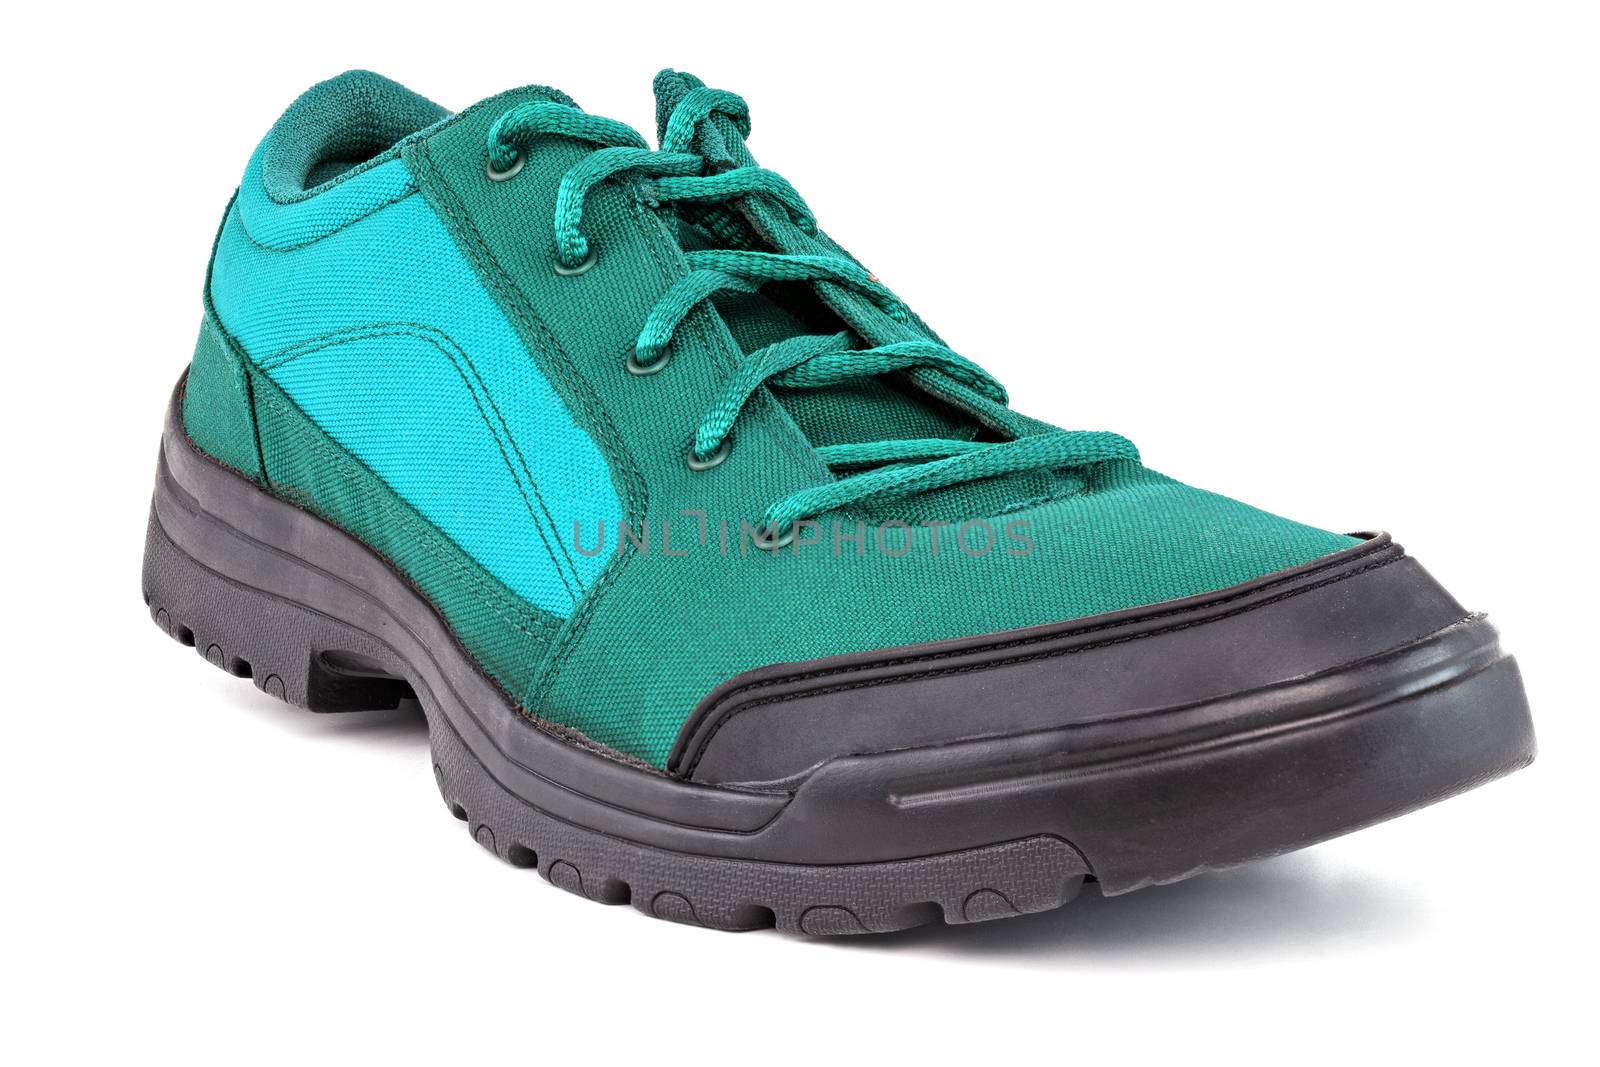 right cheap aqua mint turquoise green hiking or hunting shoe isolated on white background - perspective close-up view.